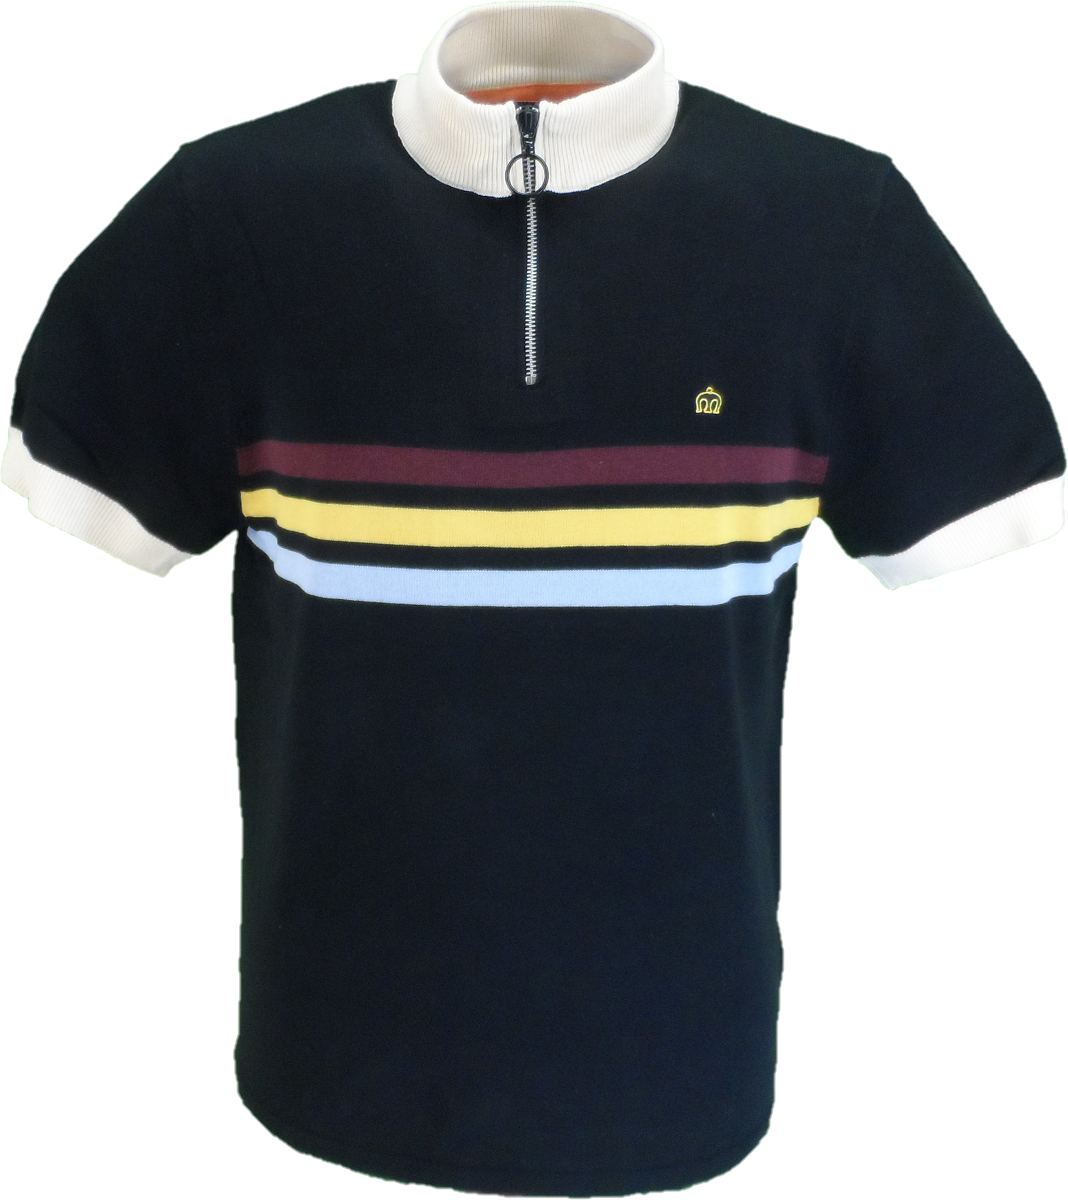 Merc Mens Brooke Black Vintage Knitted Cycling Top